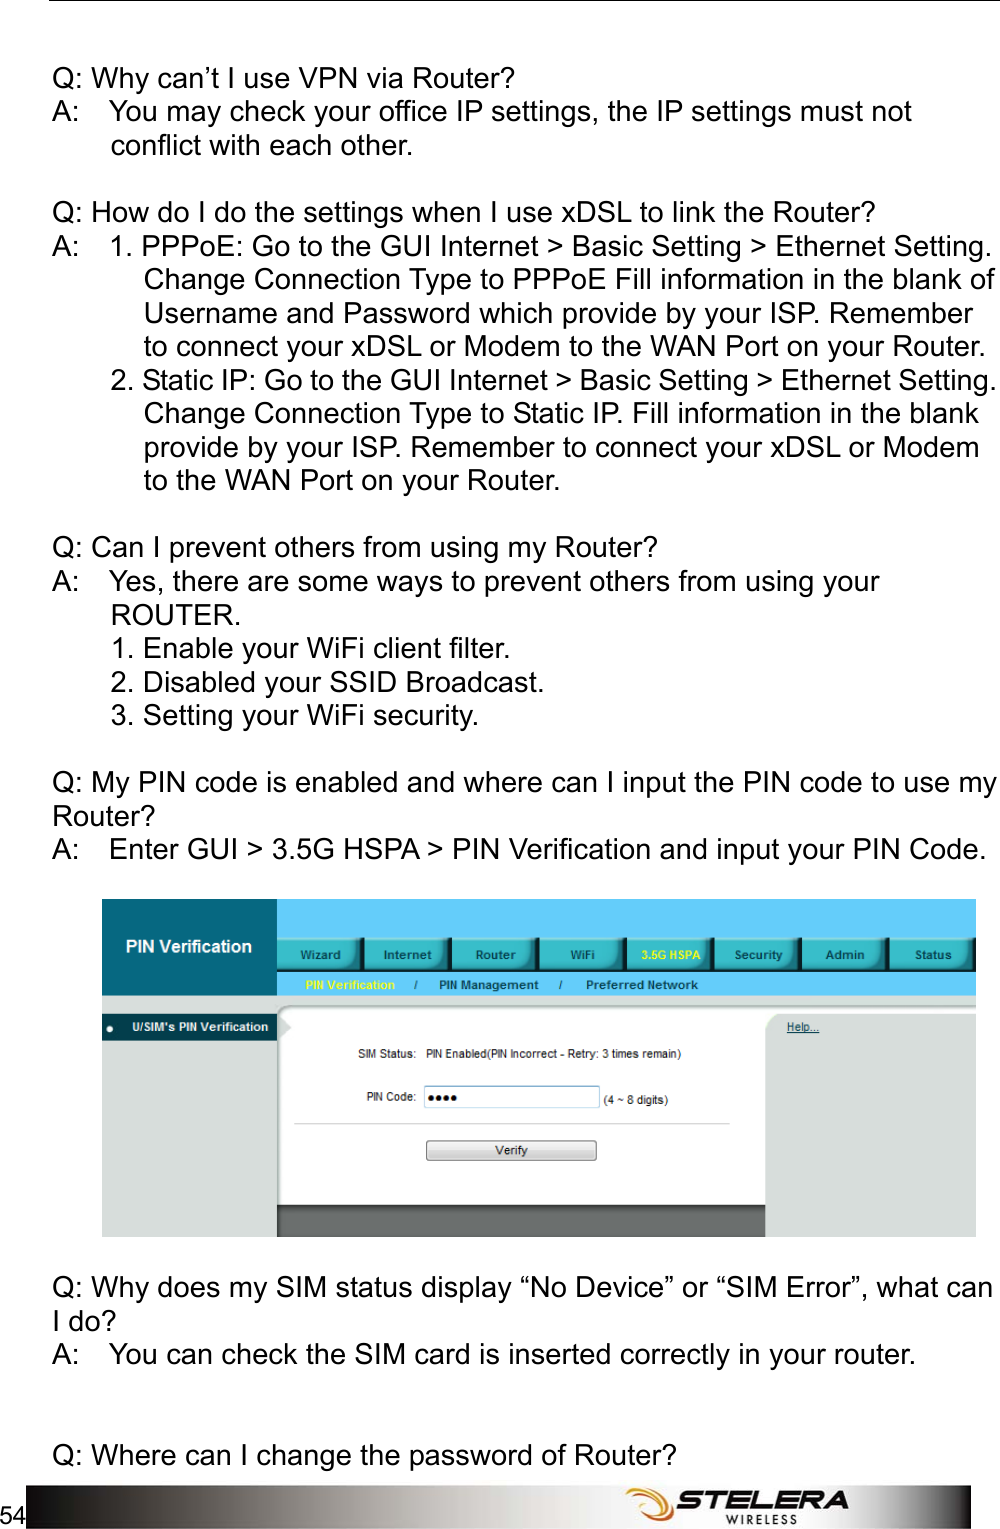 Appendix A: FAQ 54    Q: Why can’t I use VPN via Router?   A:    You may check your office IP settings, the IP settings must not conflict with each other.       Q: How do I do the settings when I use xDSL to link the Router?   A:    1. PPPoE: Go to the GUI Internet &gt; Basic Setting &gt; Ethernet Setting. Change Connection Type to PPPoE Fill information in the blank of Username and Password which provide by your ISP. Remember to connect your xDSL or Modem to the WAN Port on your Router.   2. Static IP: Go to the GUI Internet &gt; Basic Setting &gt; Ethernet Setting. Change Connection Type to Static IP. Fill information in the blank provide by your ISP. Remember to connect your xDSL or Modem to the WAN Port on your Router.   Q: Can I prevent others from using my Router?   A:    Yes, there are some ways to prevent others from using your ROUTER.          1. Enable your WiFi client filter.       2. Disabled your SSID Broadcast.          3. Setting your WiFi security.     Q: My PIN code is enabled and where can I input the PIN code to use my Router?  A:    Enter GUI &gt; 3.5G HSPA &gt; PIN Verification and input your PIN Code.       Q: Why does my SIM status display “No Device” or “SIM Error”, what can I do?   A:    You can check the SIM card is inserted correctly in your router.          Q: Where can I change the password of Router?   